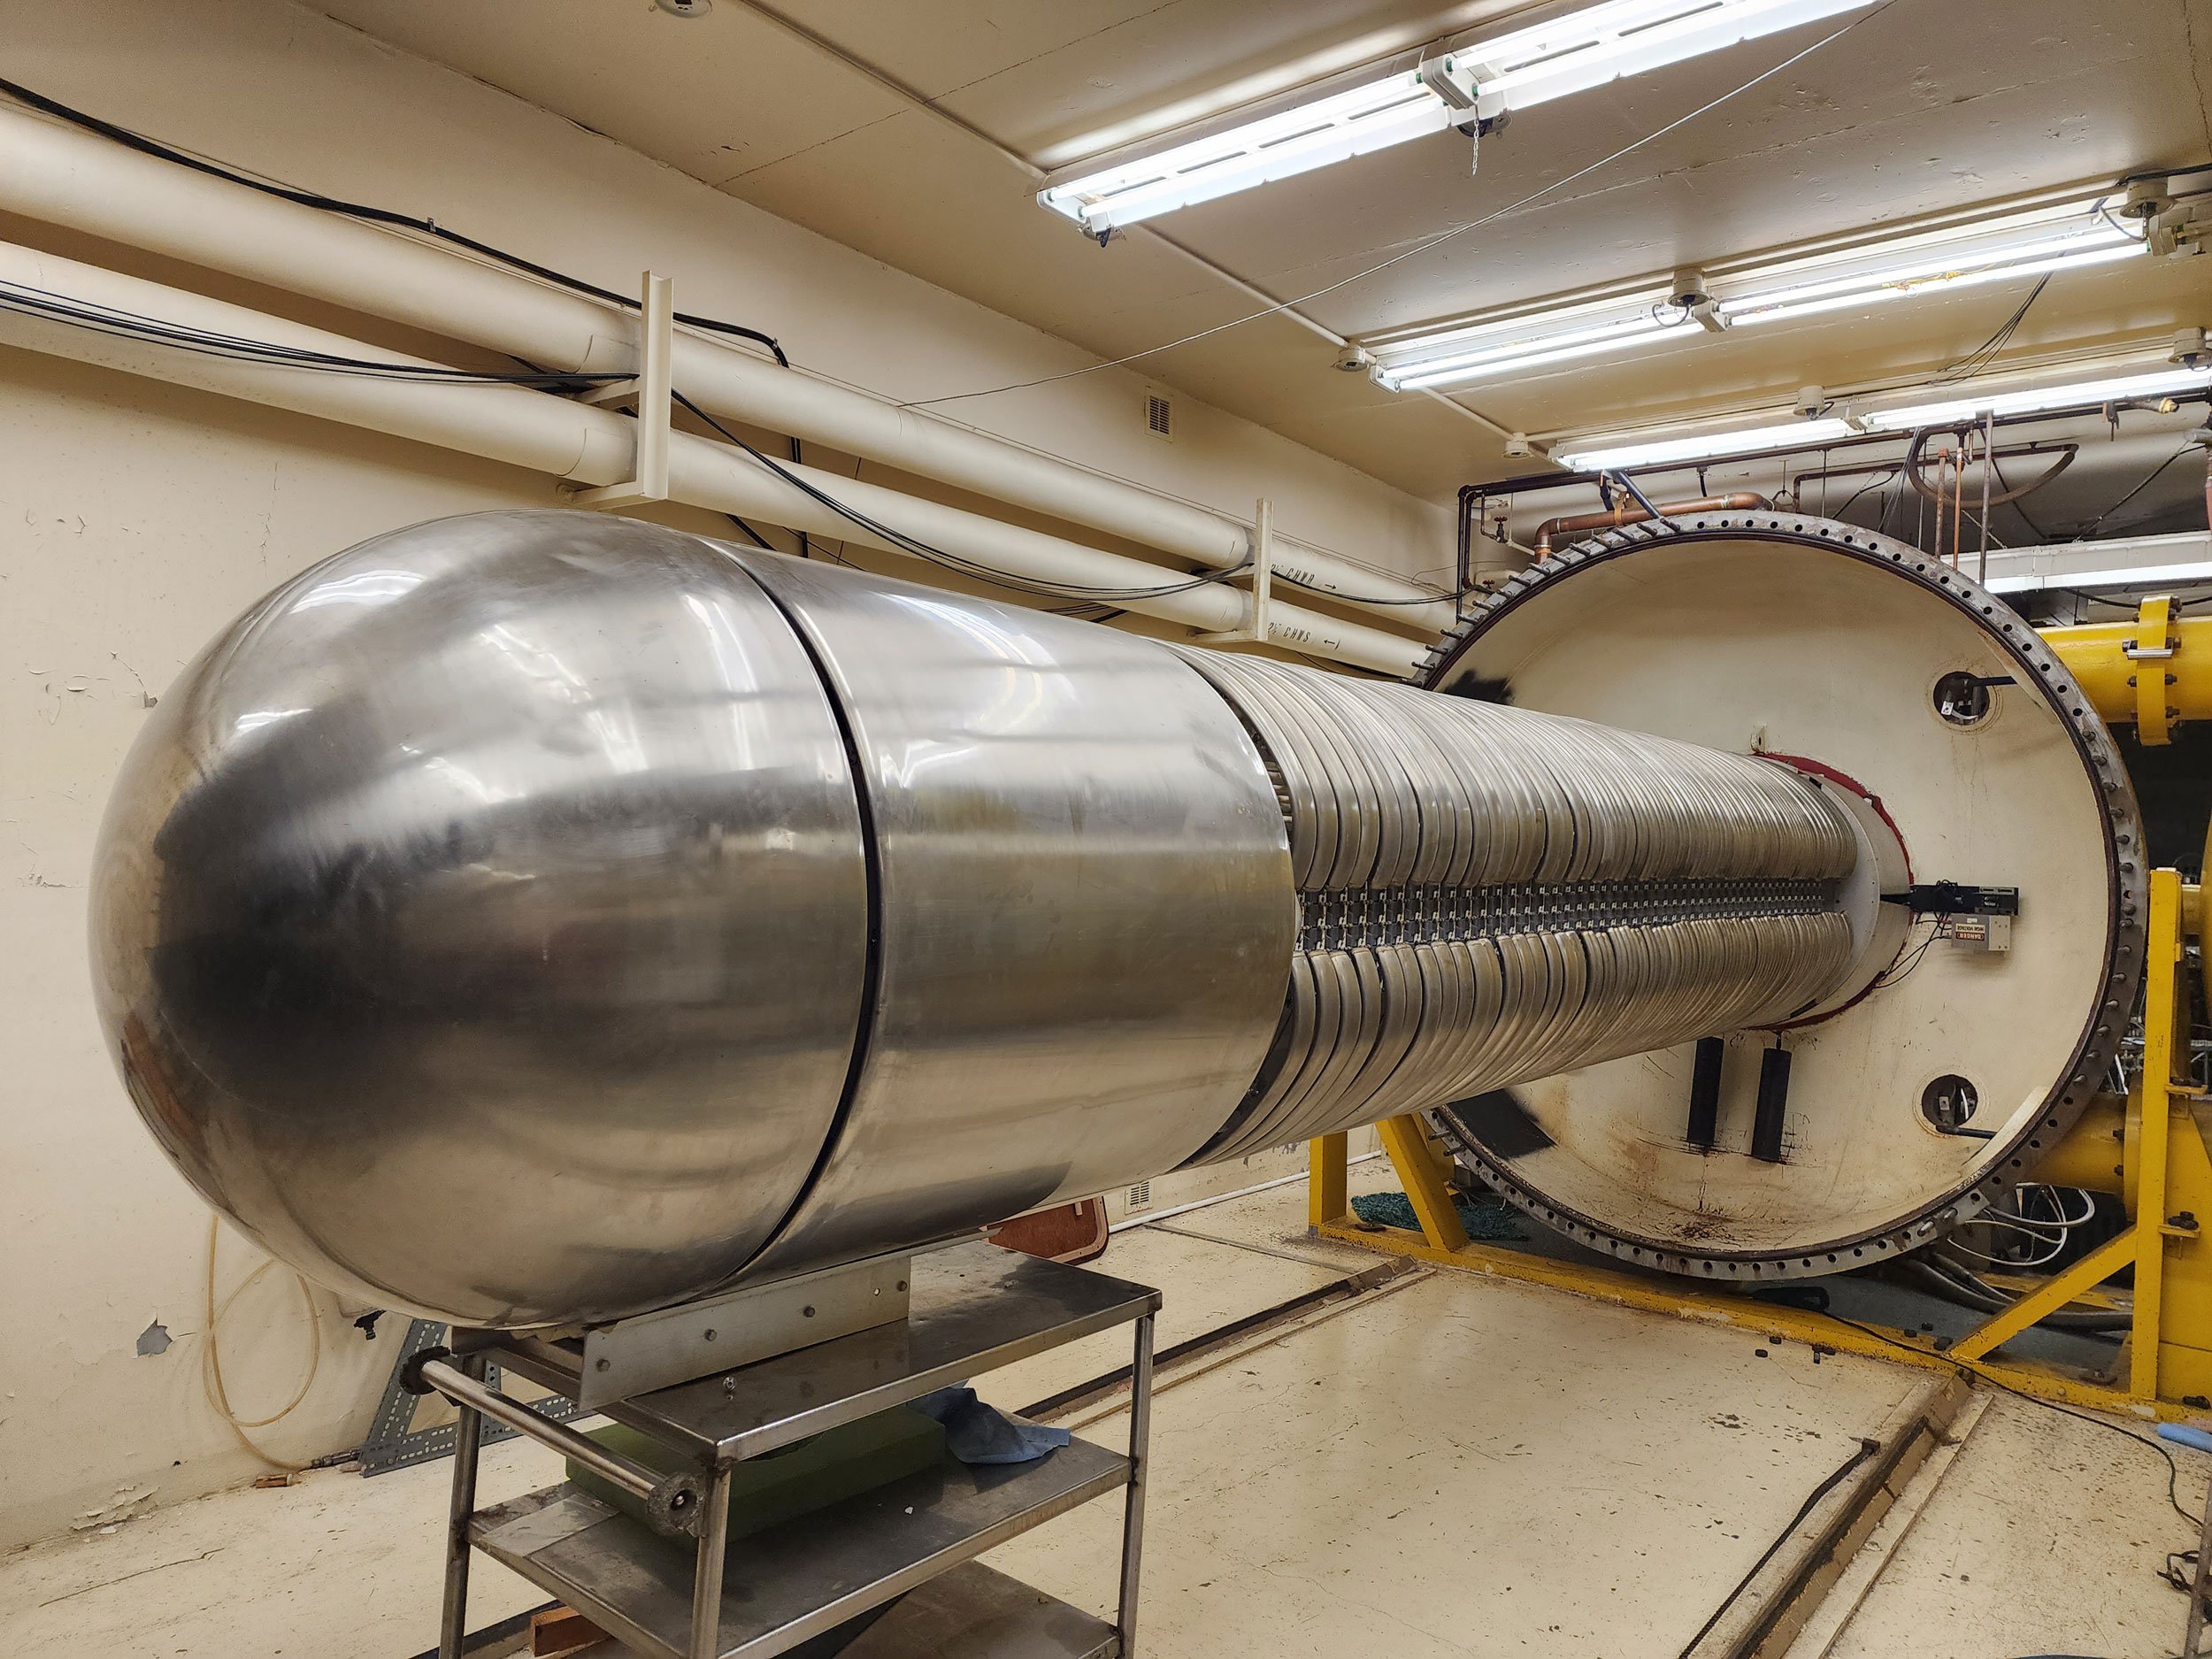 The inside of the RDI Dynamitron particle accelerator is a long metal tube made a several parts.